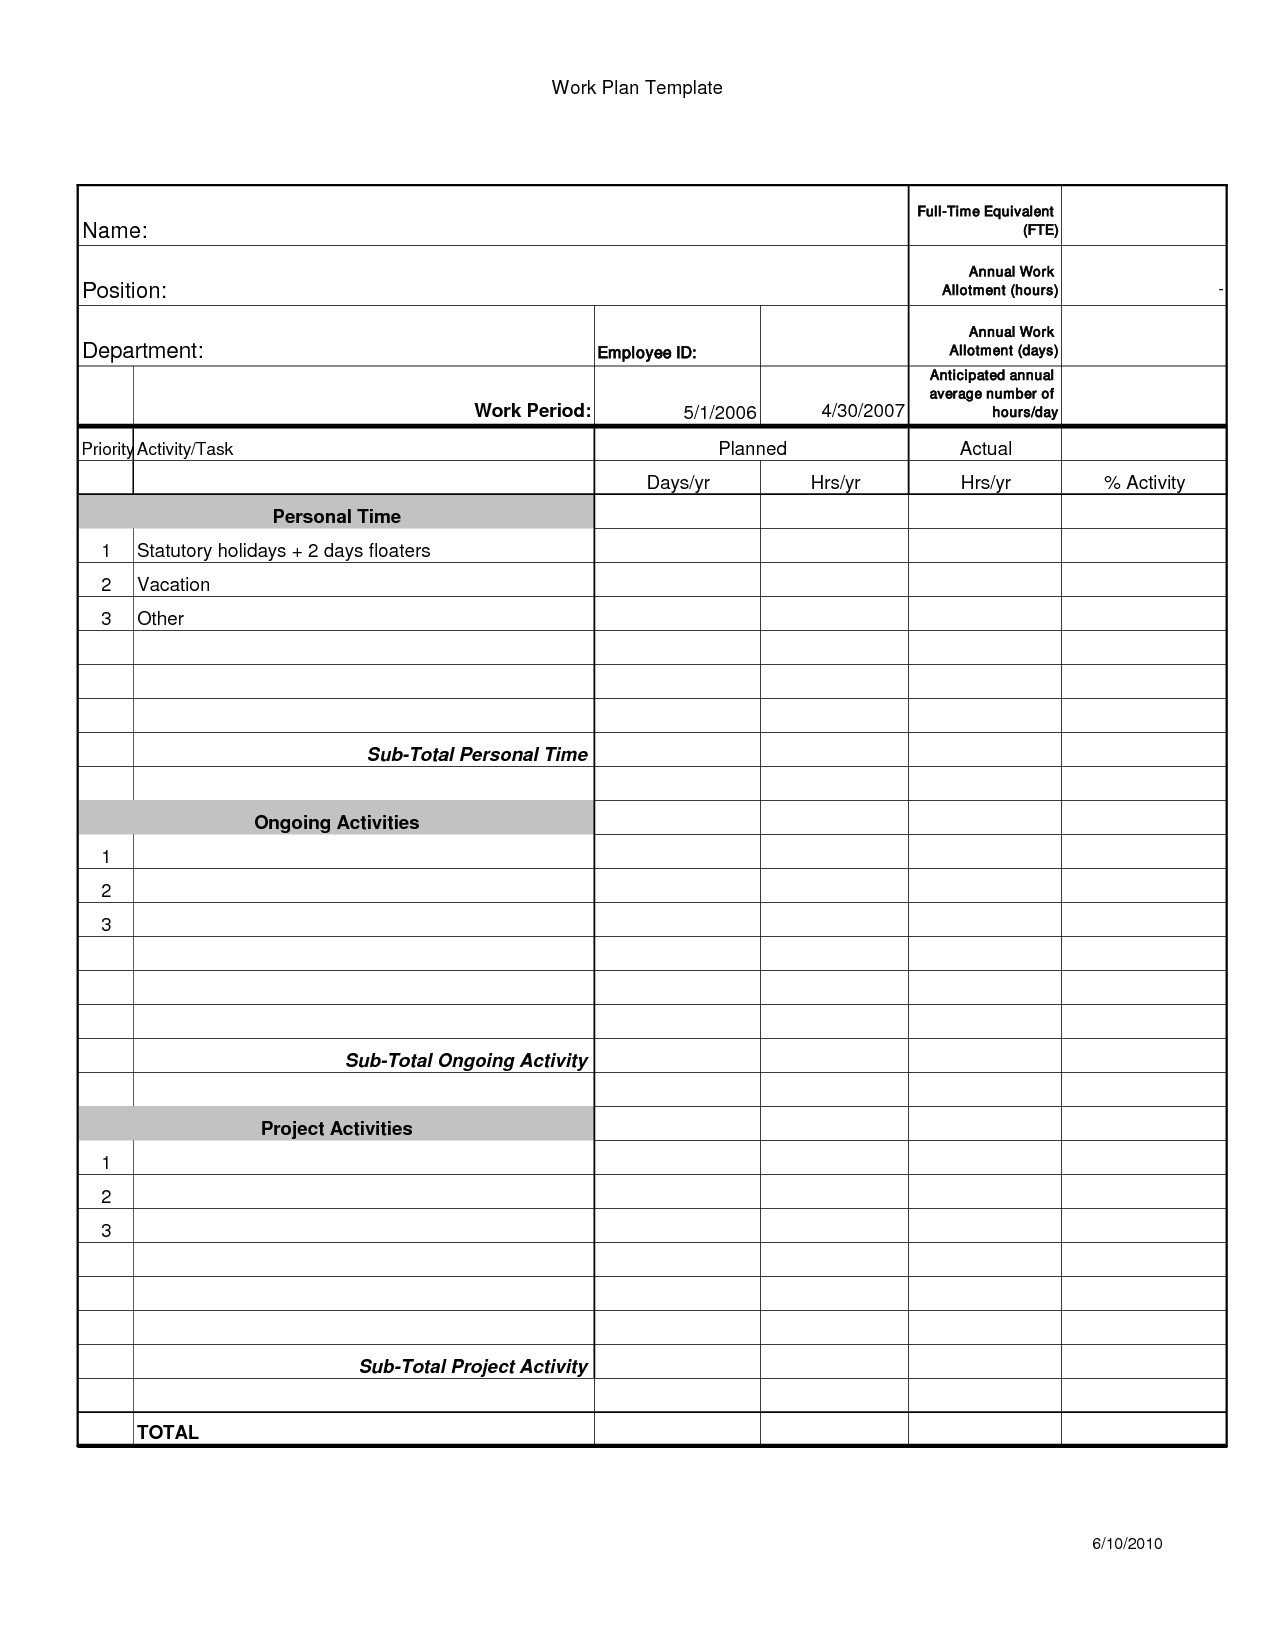 post annual work plan template excel 30989